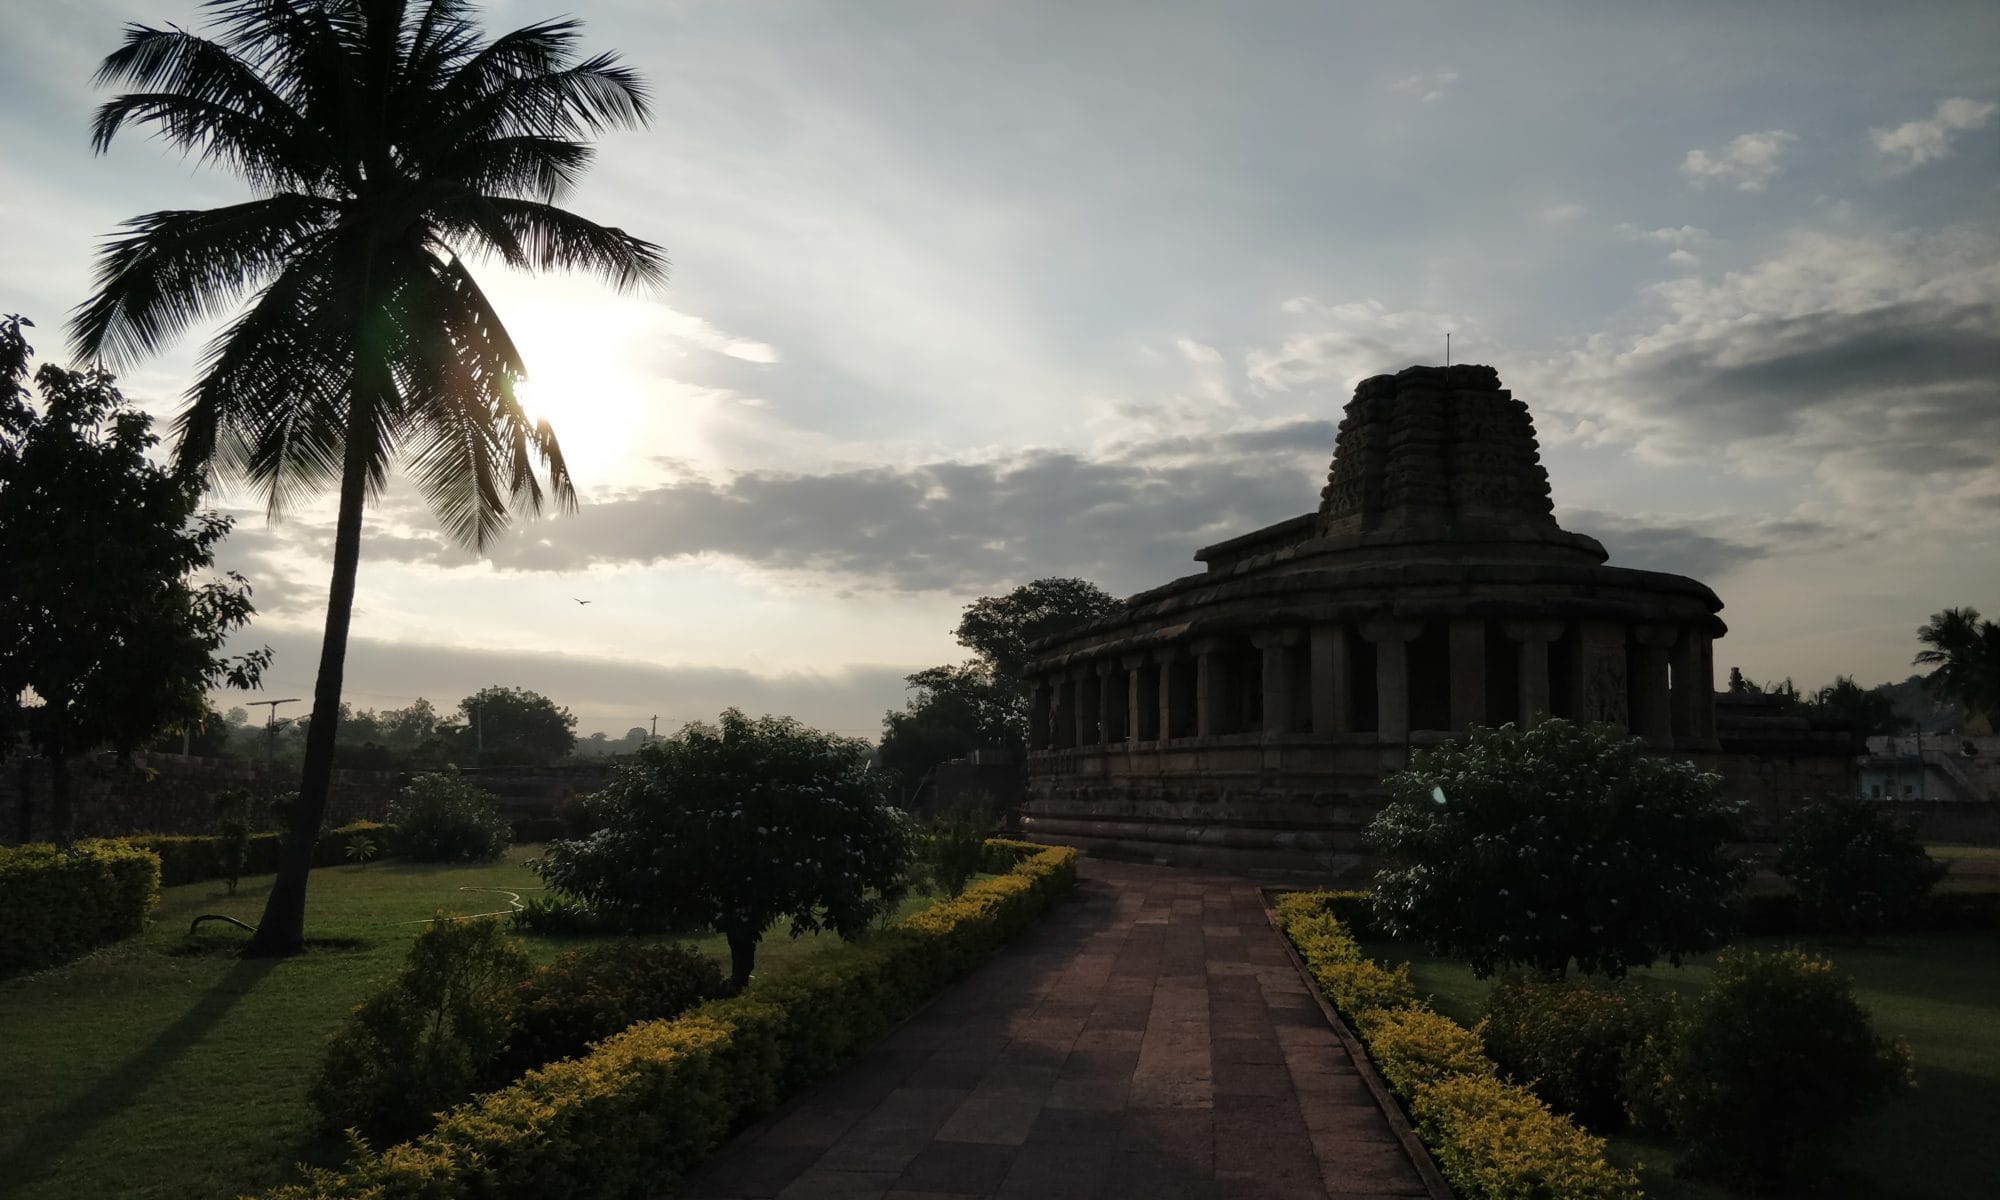 Durga temple and the early morning sun